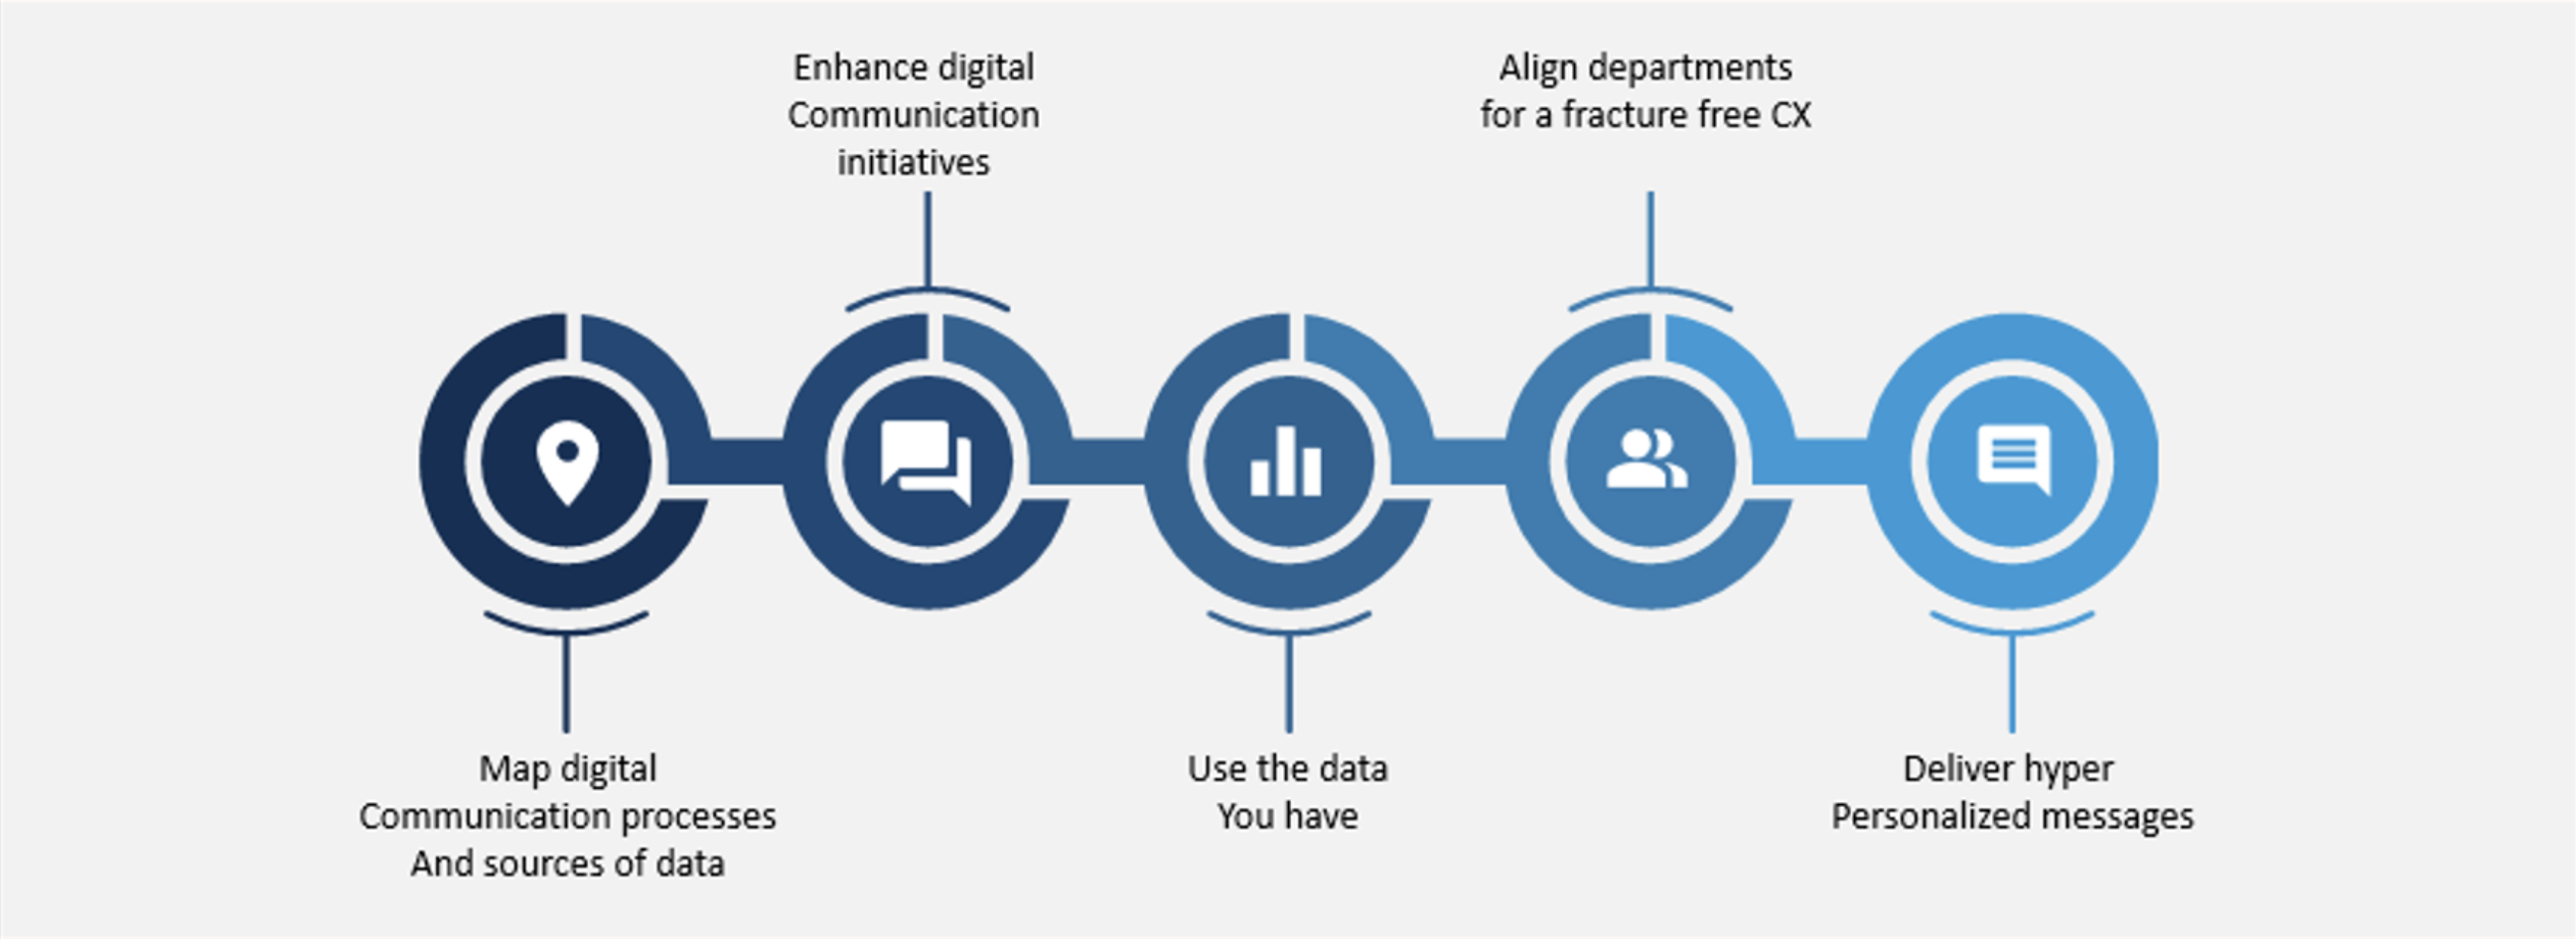 Map digital communication processes and sources of data - enhance digital communication initiatives - Align departments for a fracture free CX - Deliver hyper personalized messages